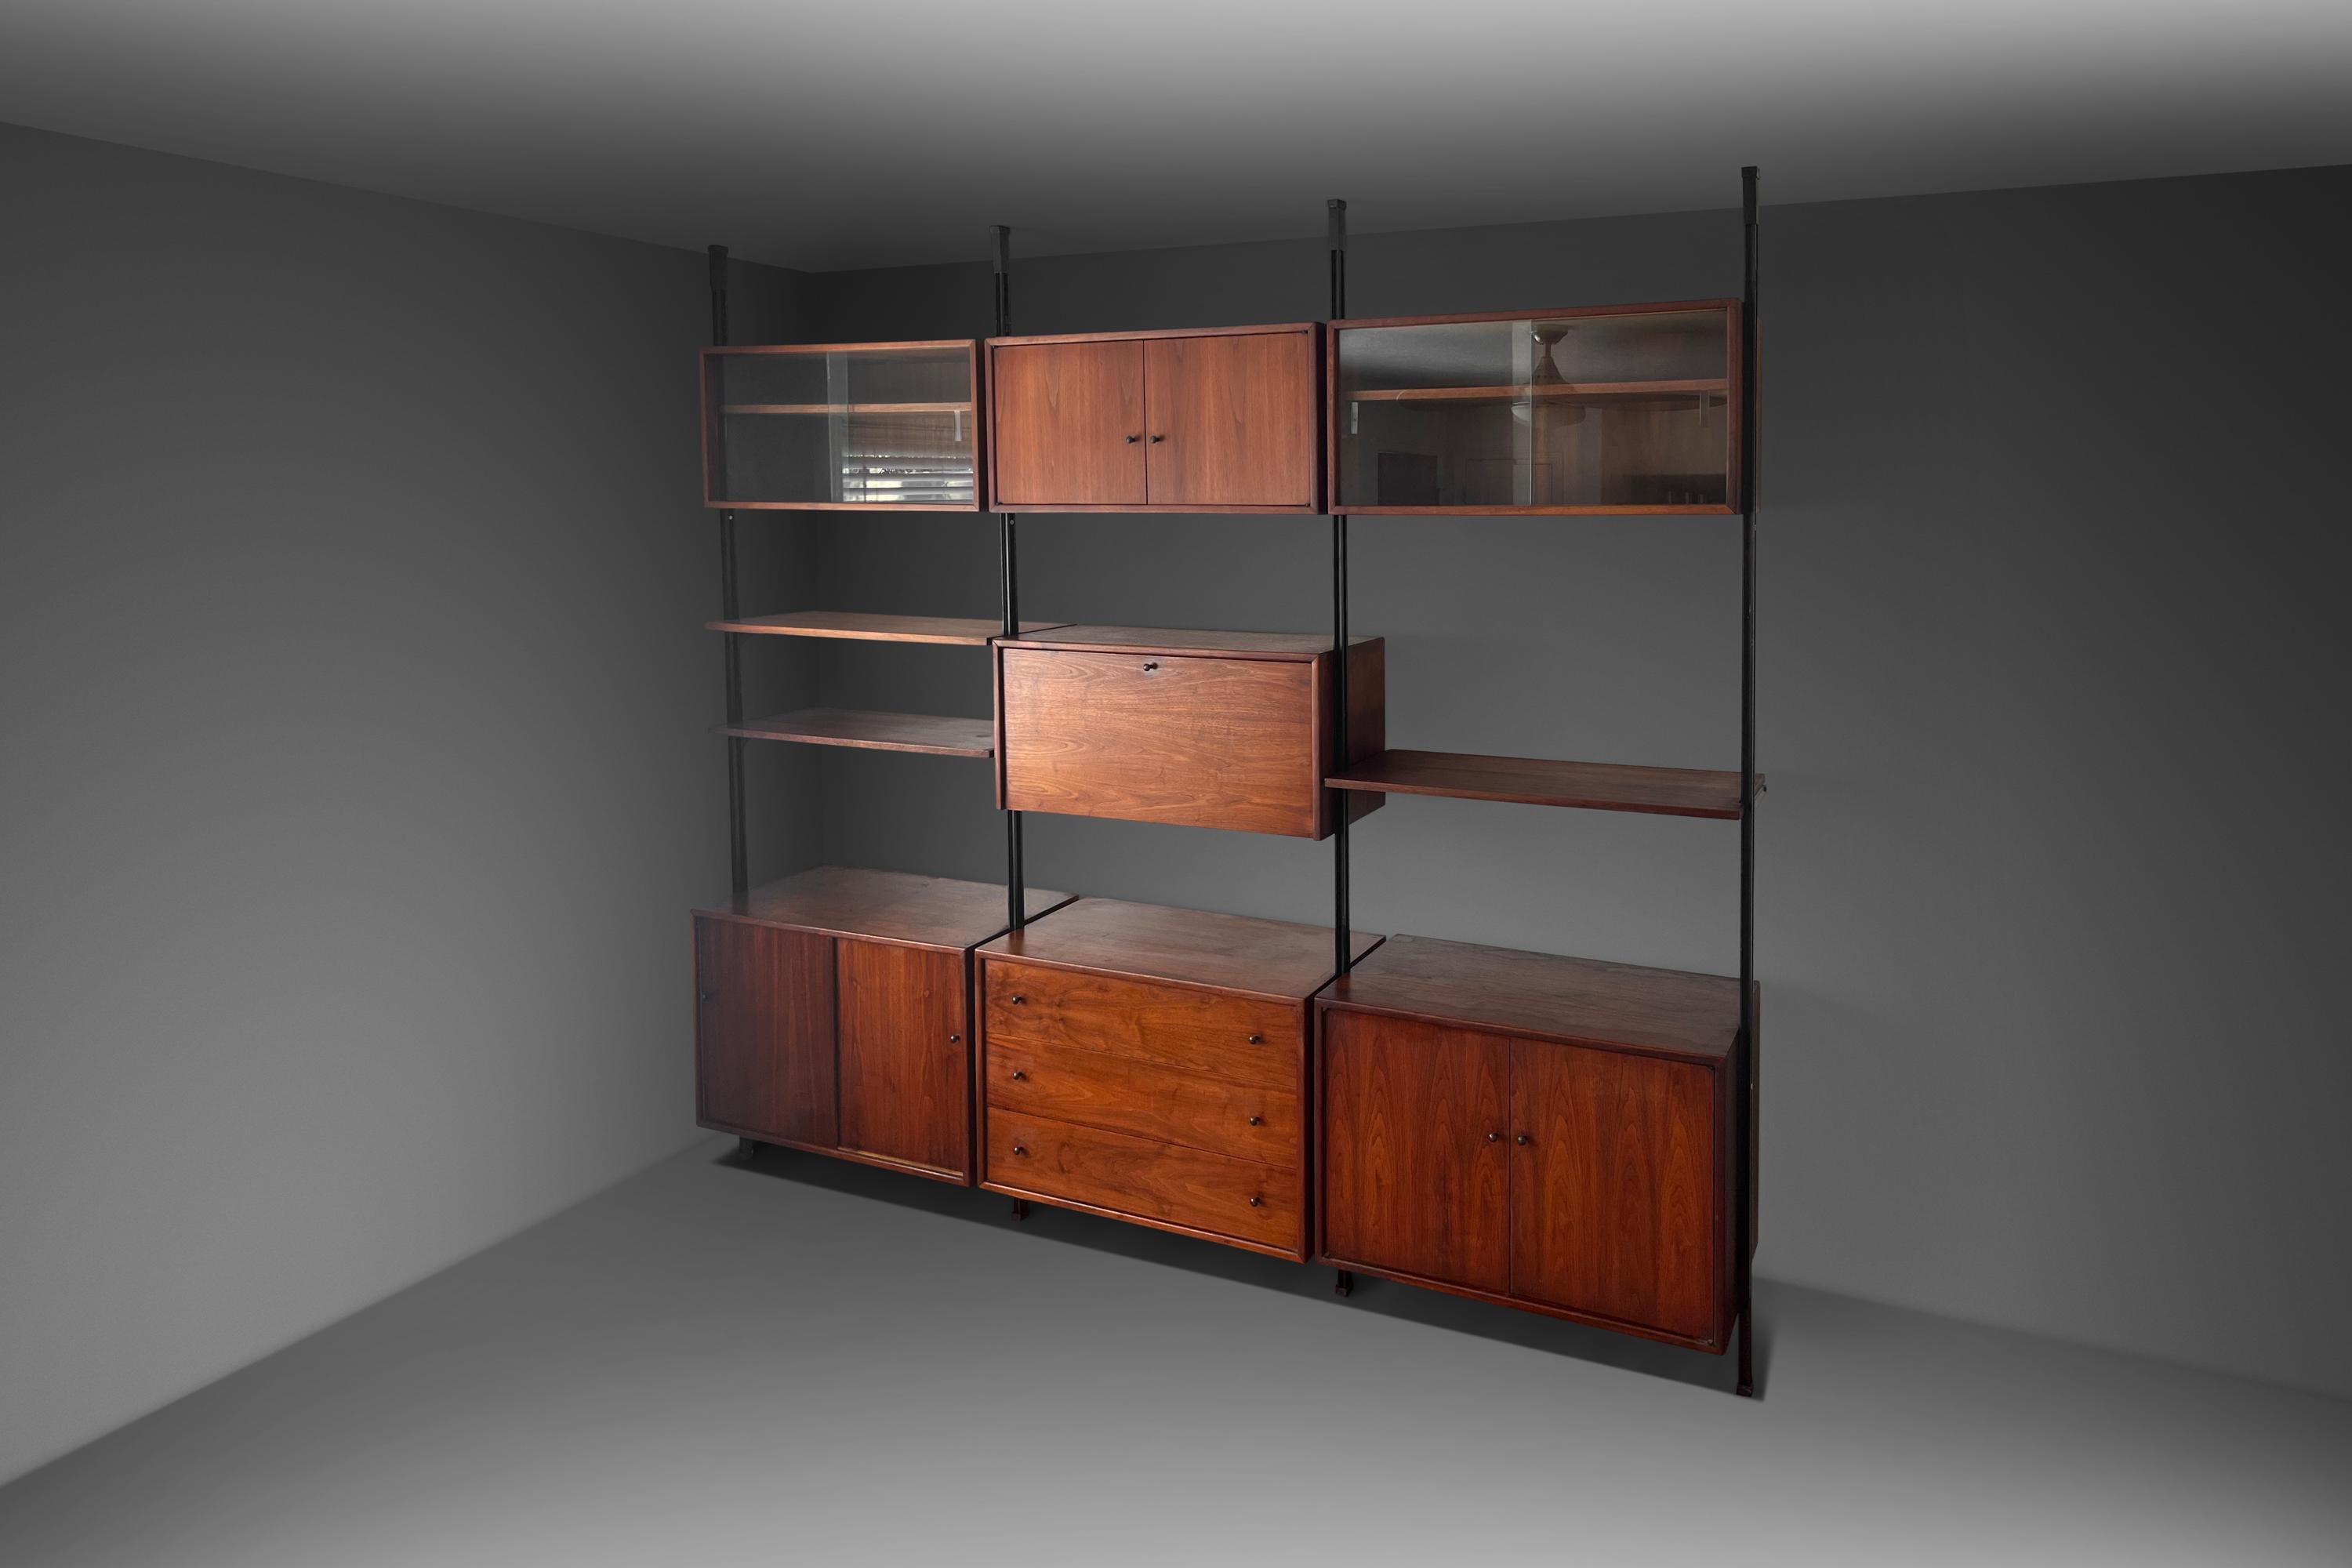 A rare and exceptional wall unit designed with strong influences taken from George Nelson's Omni Wall Unit for Herman Miller. The systems, modular design that can be configured to your taste. The wall unit includes three bottom cabinets, two of